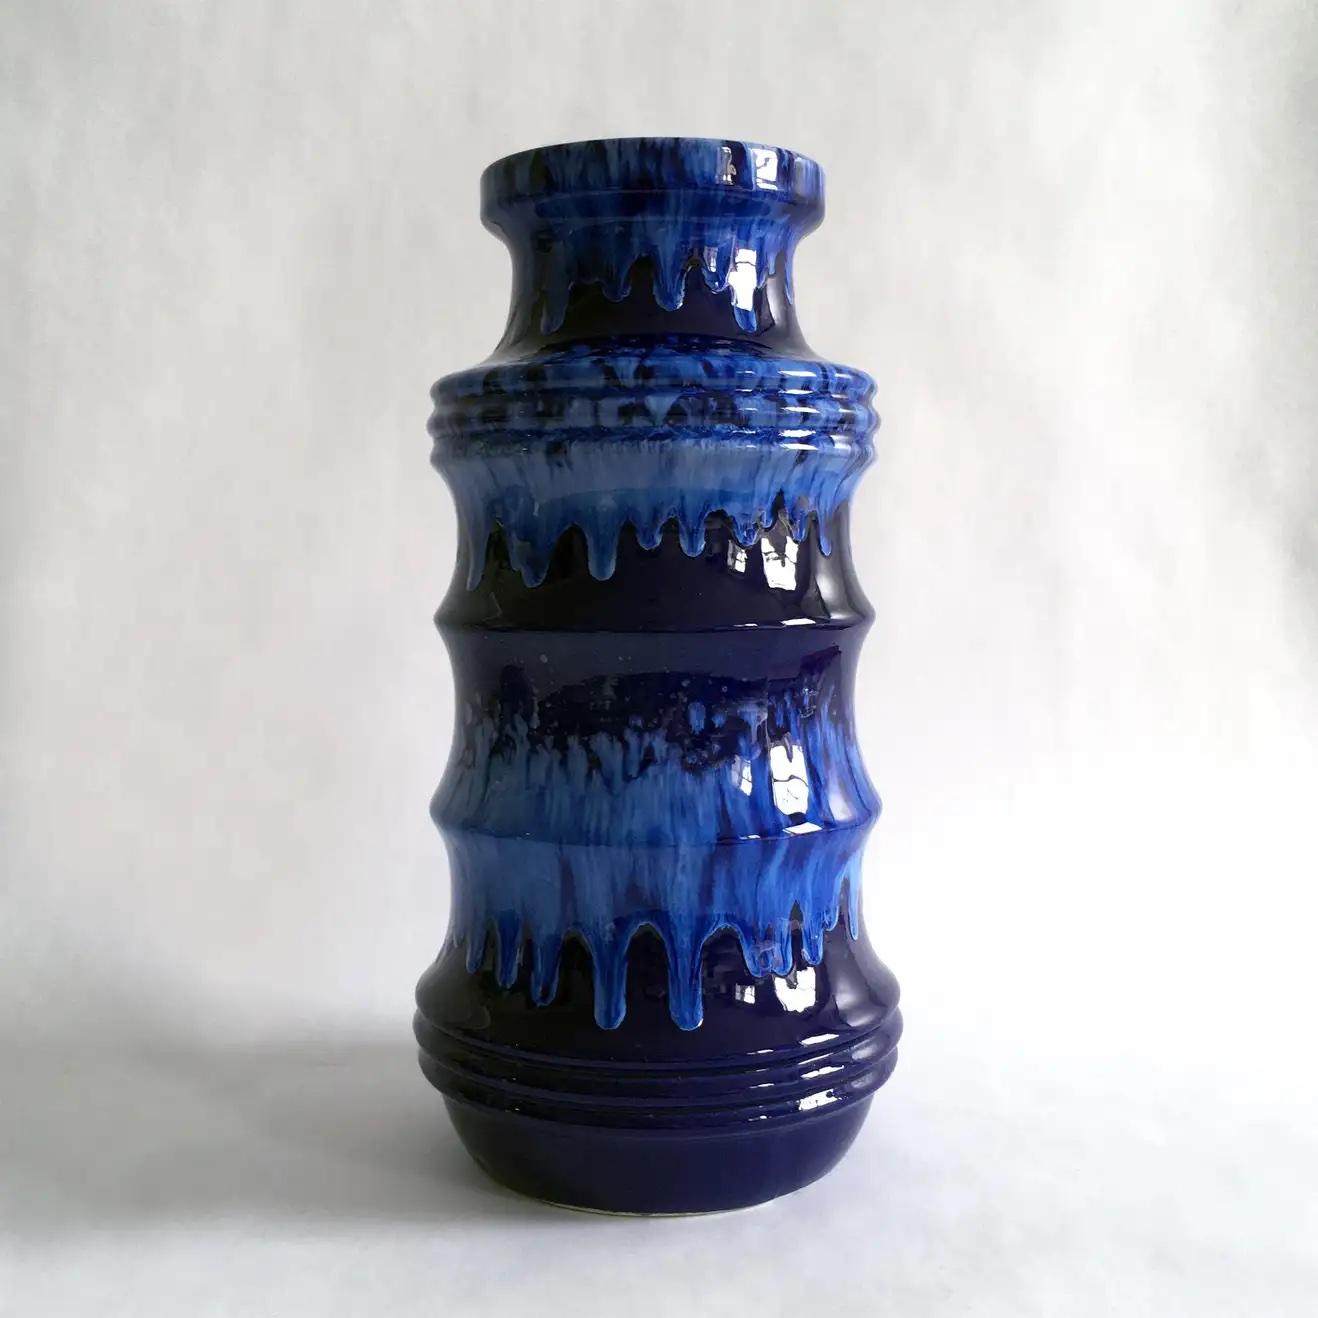 Blue vase by Scheurich, the variation of blue tones in the lava glaze makes for a stunning vase.

Measurements: H 11. 5